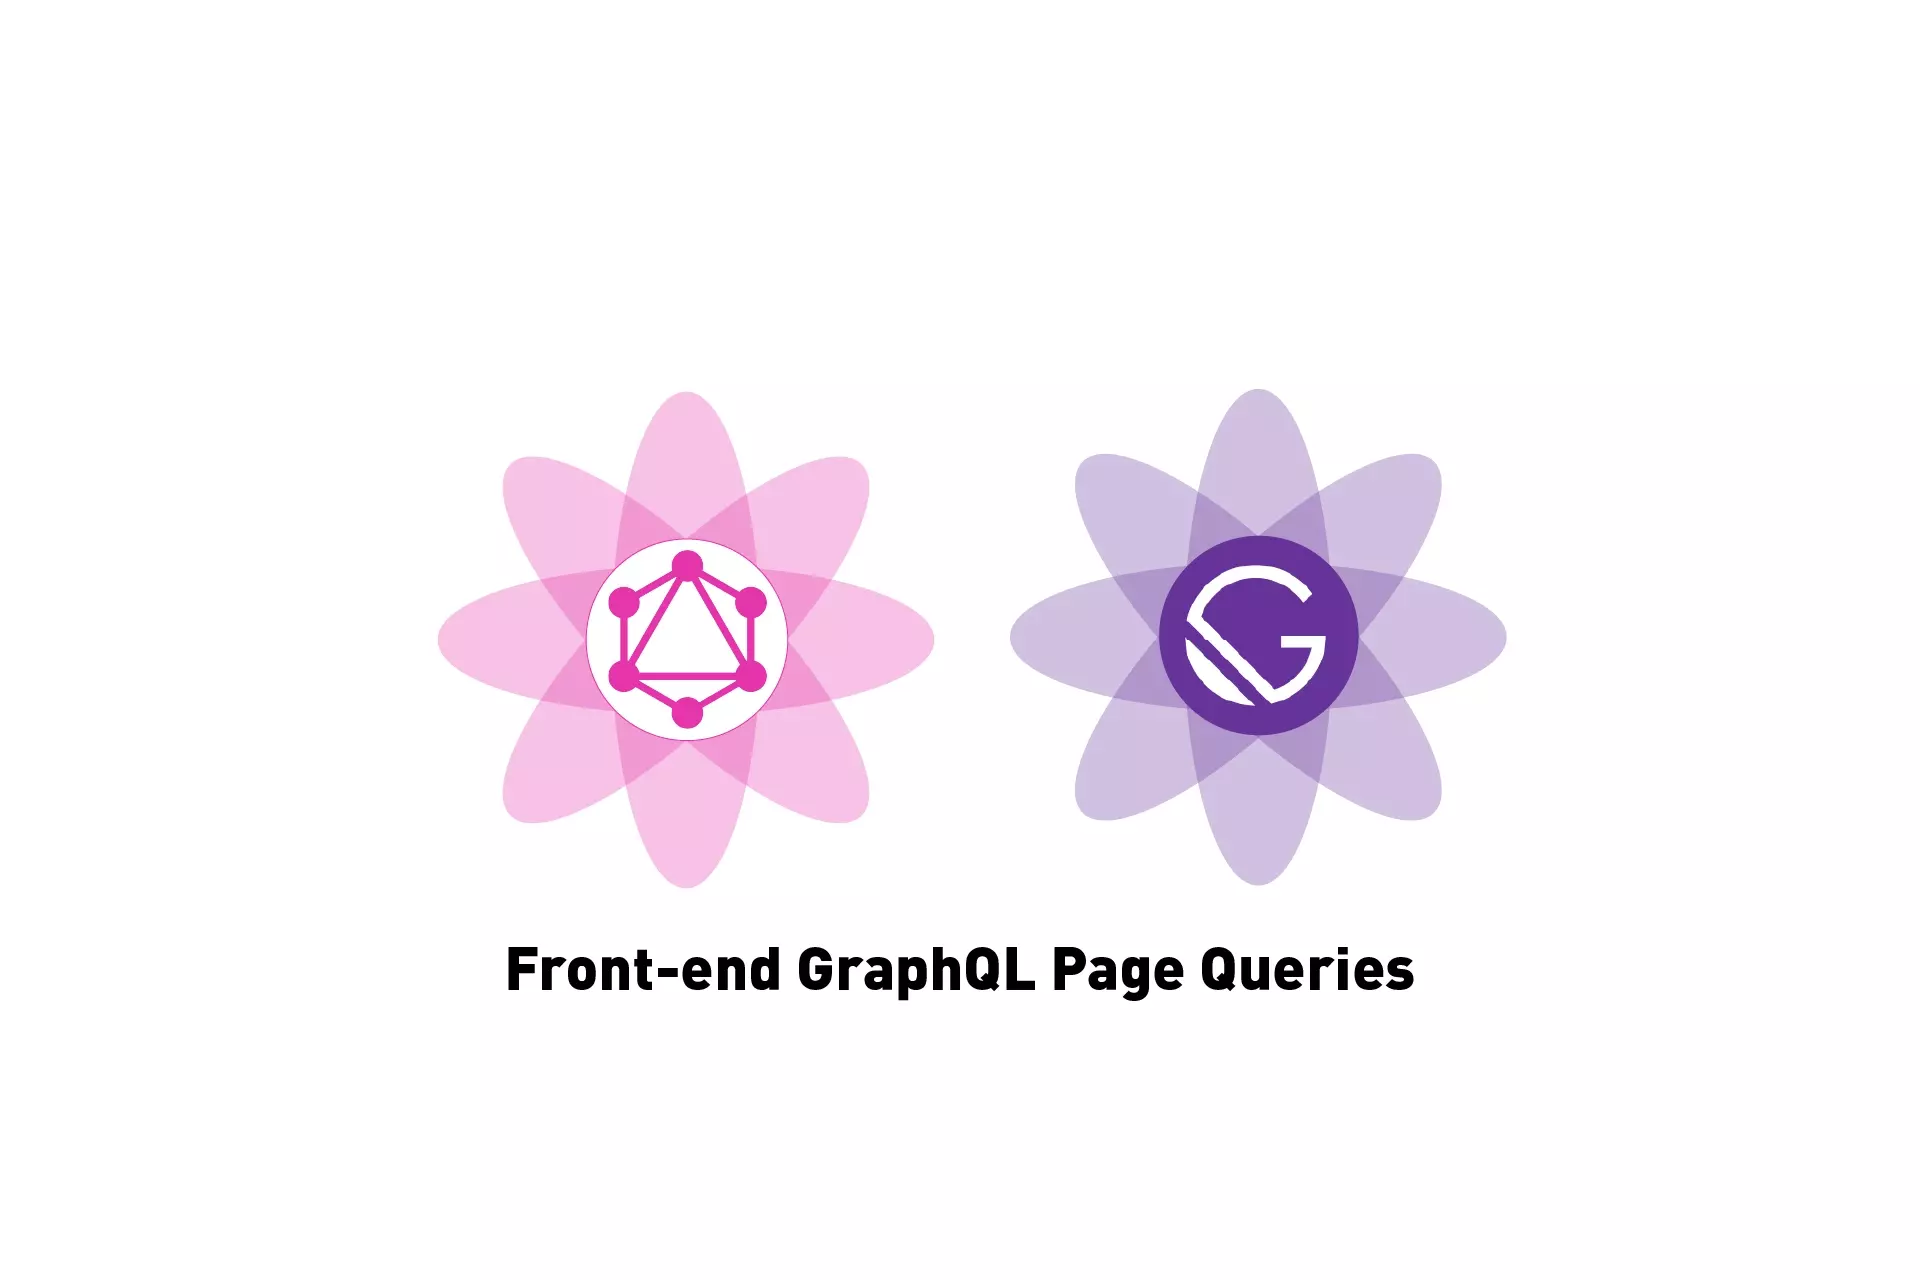 A flower that represents GraphQL next to one that represents GatsbyJS. Beneath them sits the text "Front-end GraphQL Page Queries".